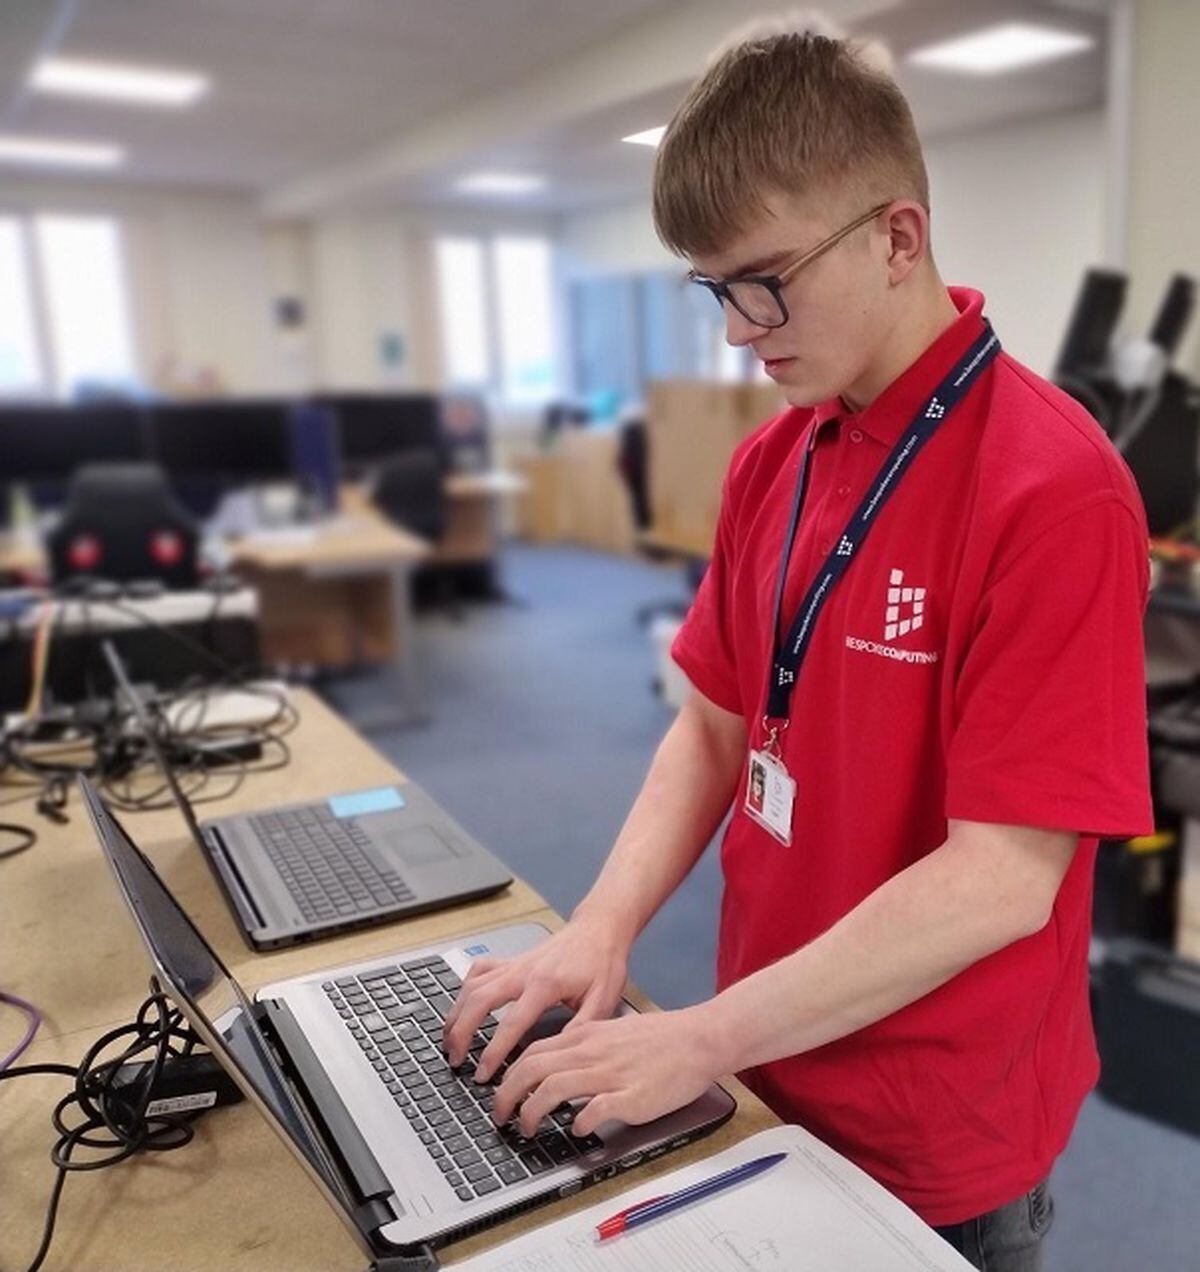 Harvey Taylor, on an apprenticeship at Bespoke Computing in Telford